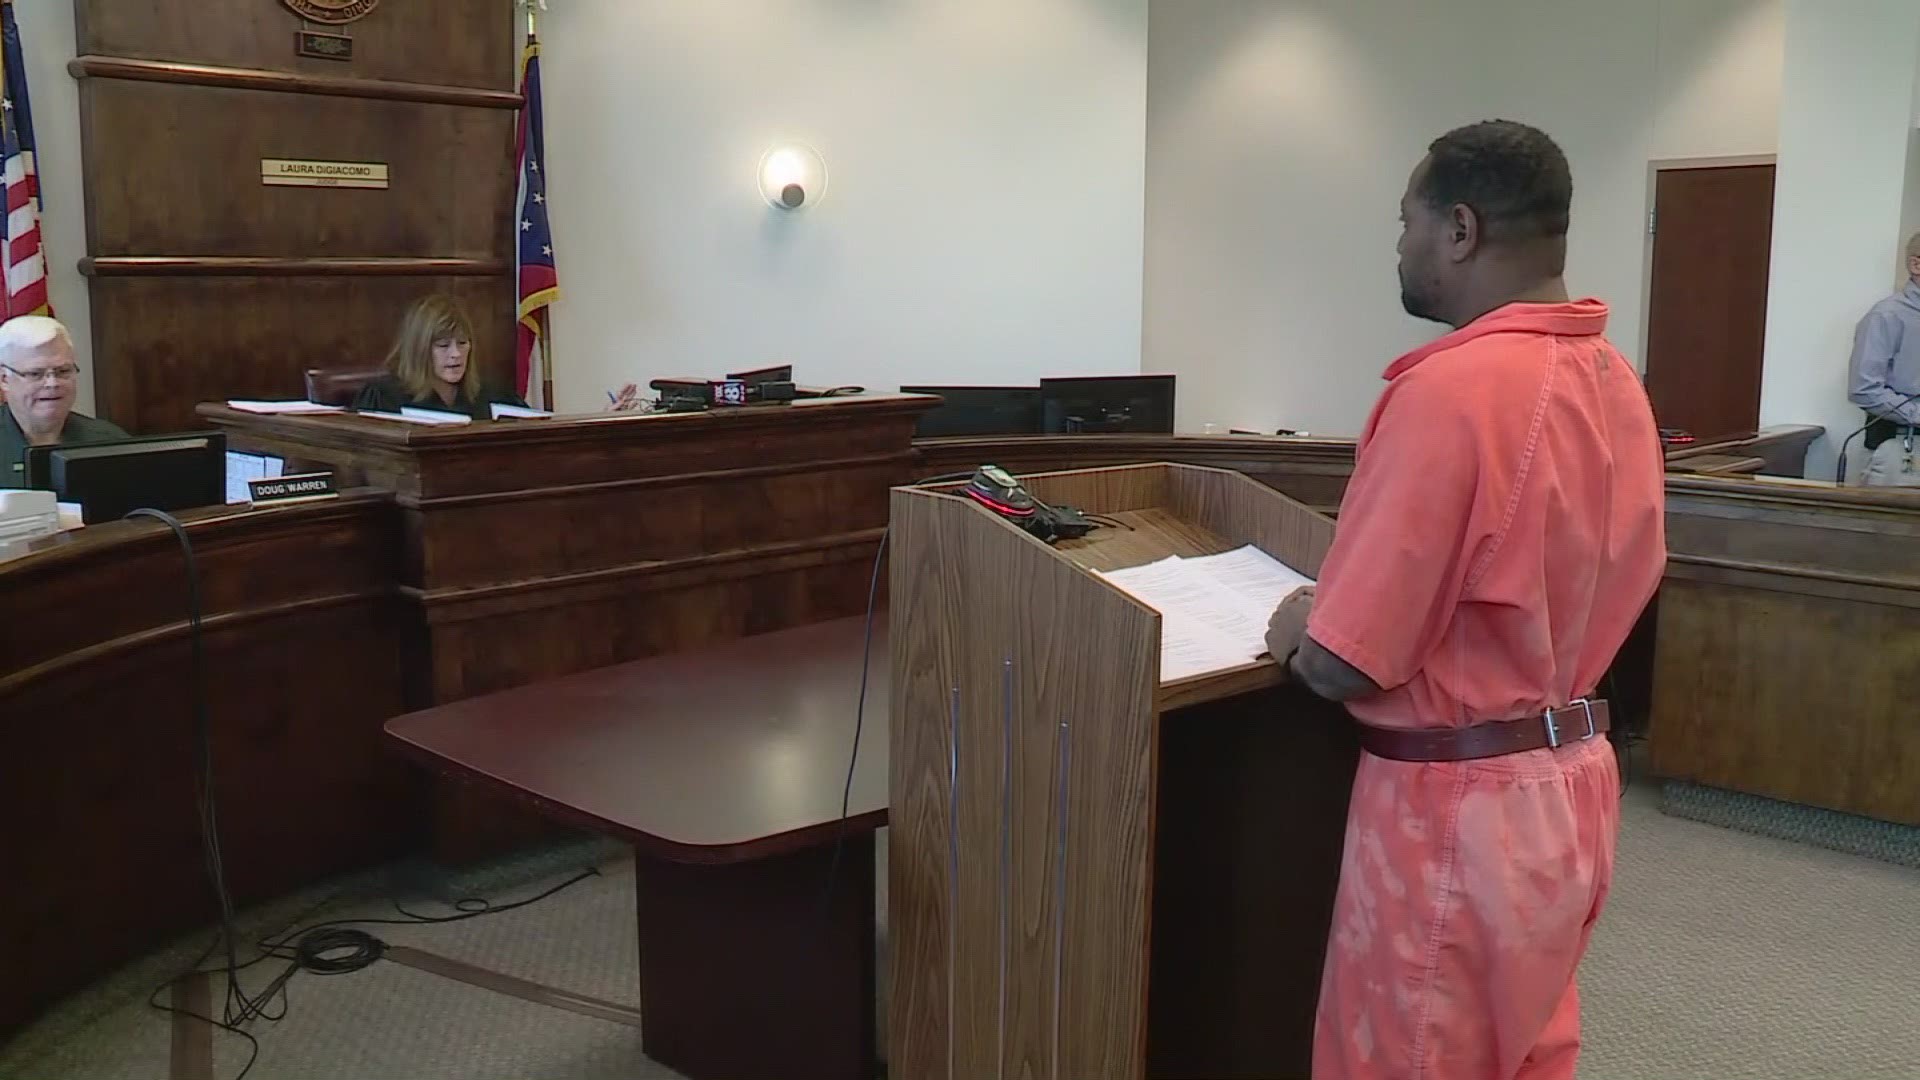 Donte Conard is accused of causing the crash that killed four people.